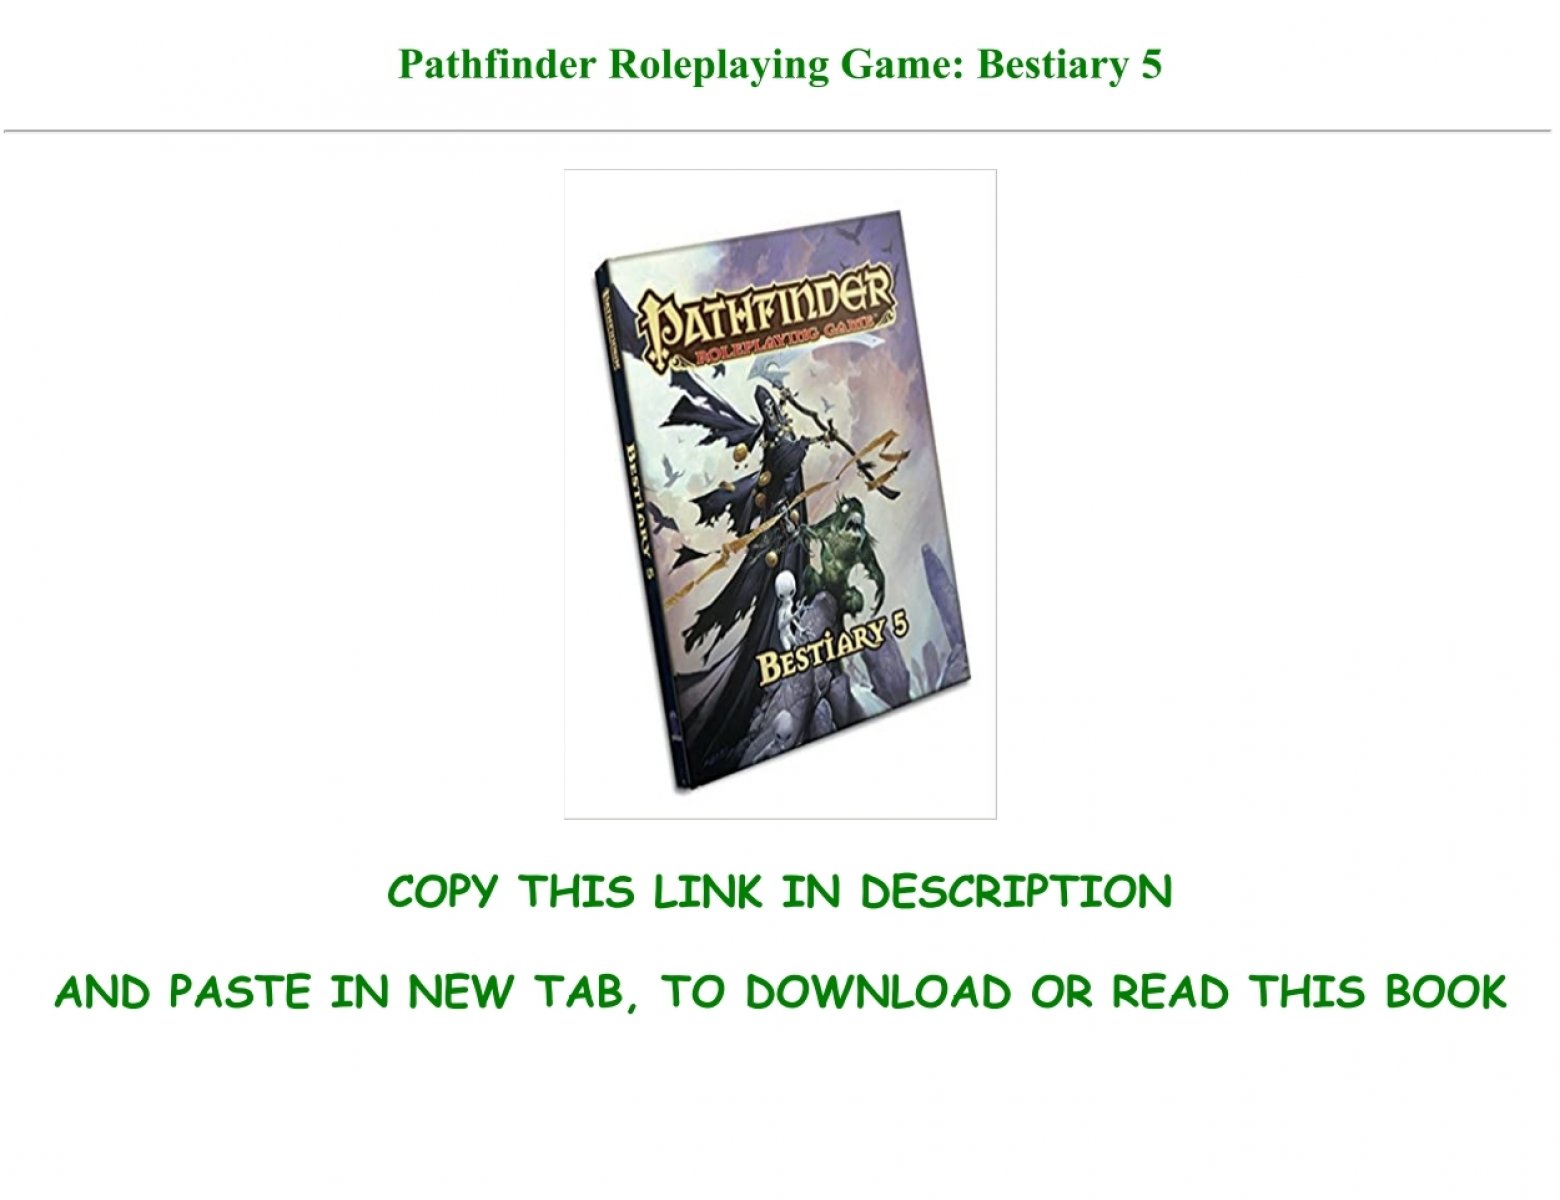 5. Pathfinder Roleplaying Game: Bestiary 2 - Google Books - wide 3